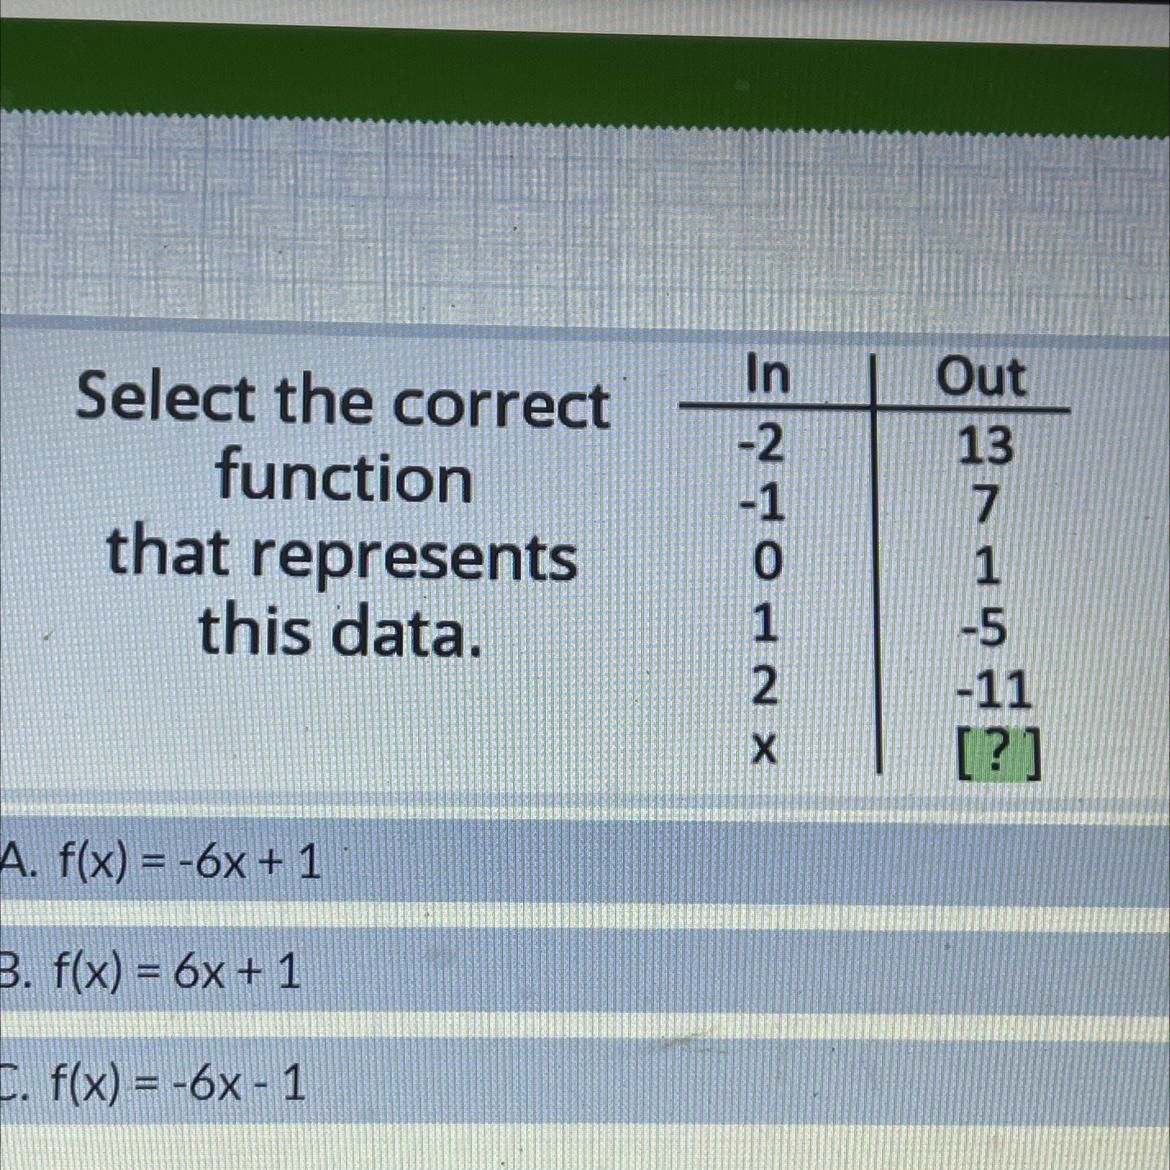 Select The Correctfunctionthat Representsthis Data.A. F(x) = -6x +1B. F(x) = 6x +1C. F(x) = -6x - 1